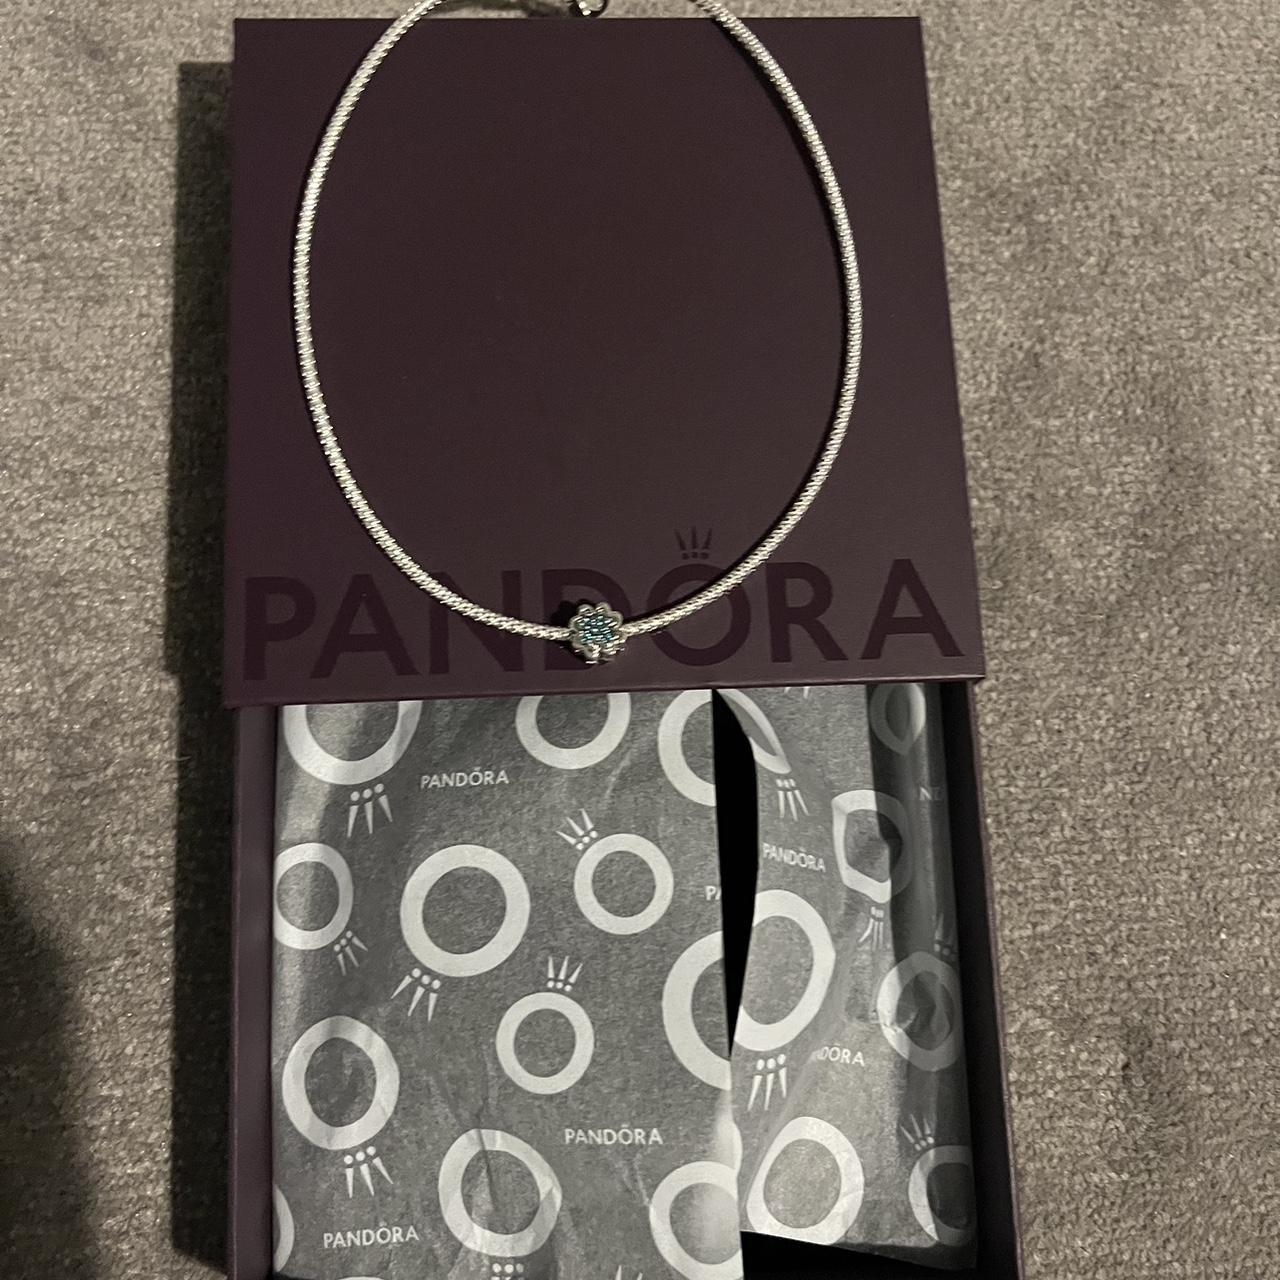 Pandora Essence chain necklace with Positivity and Dedication charms silver  925 | eBay